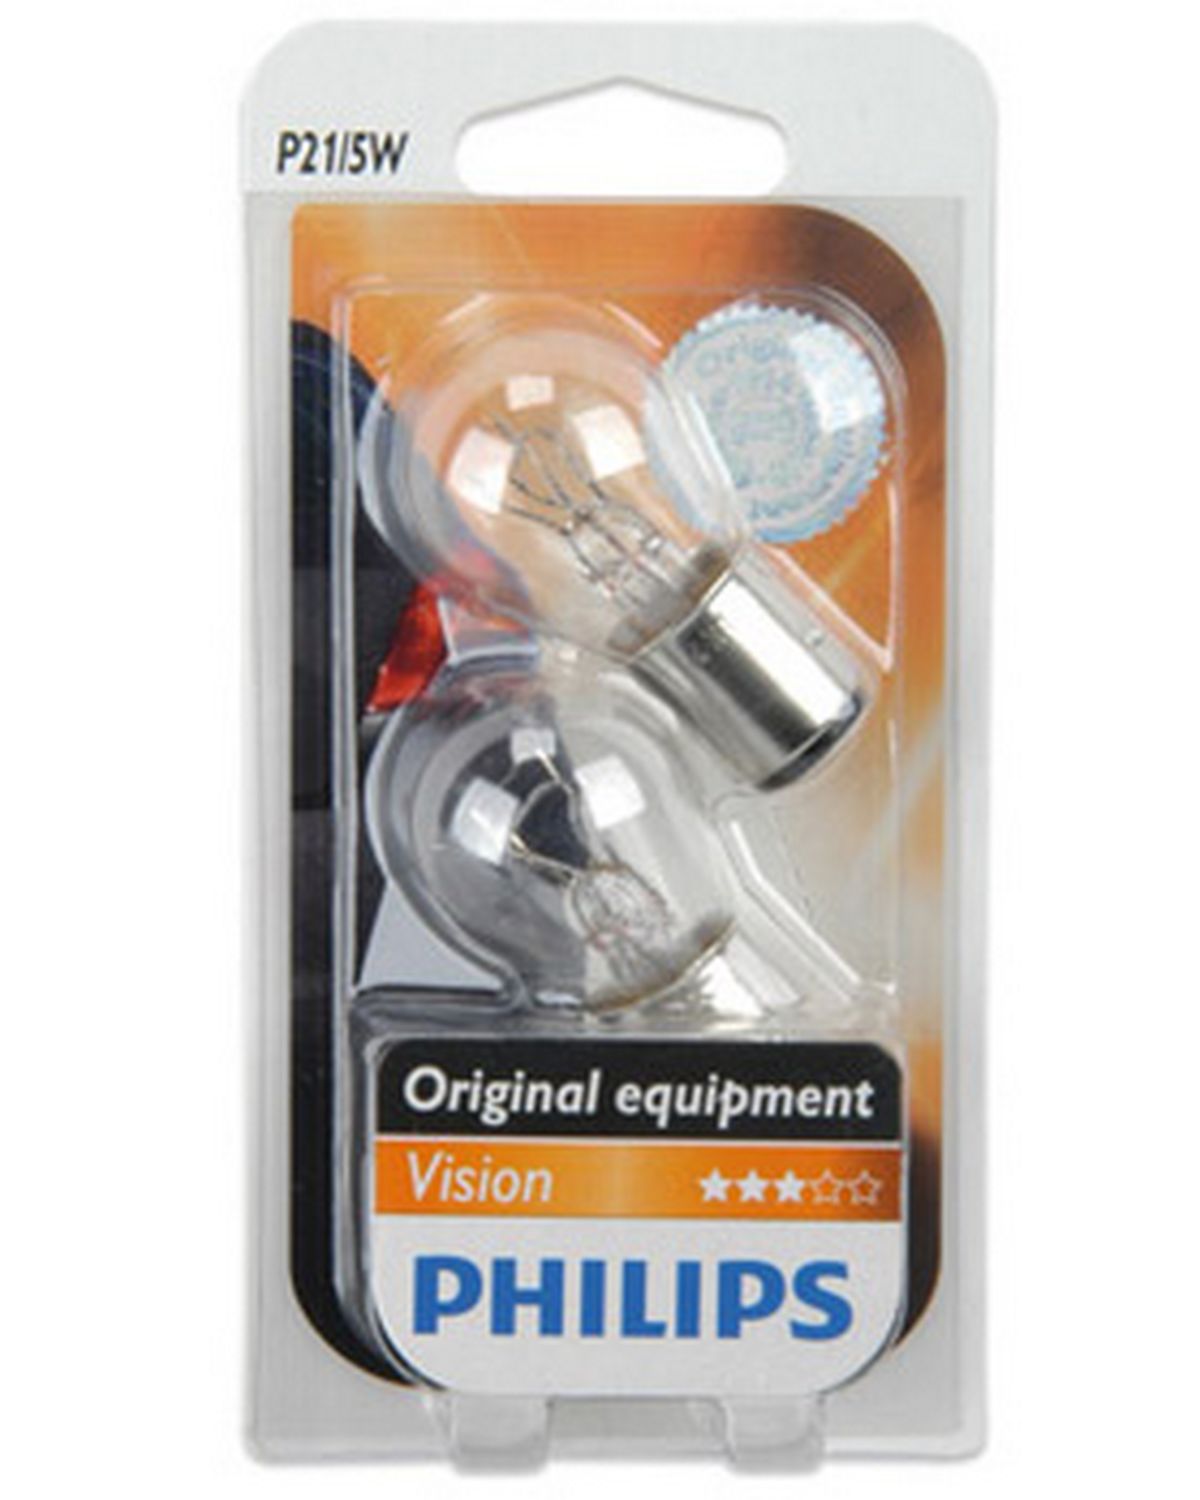 https://www.cardy.fr/images/large/philips-ampoule-signalisation-p21-5w-vision-12v_160521.jpg